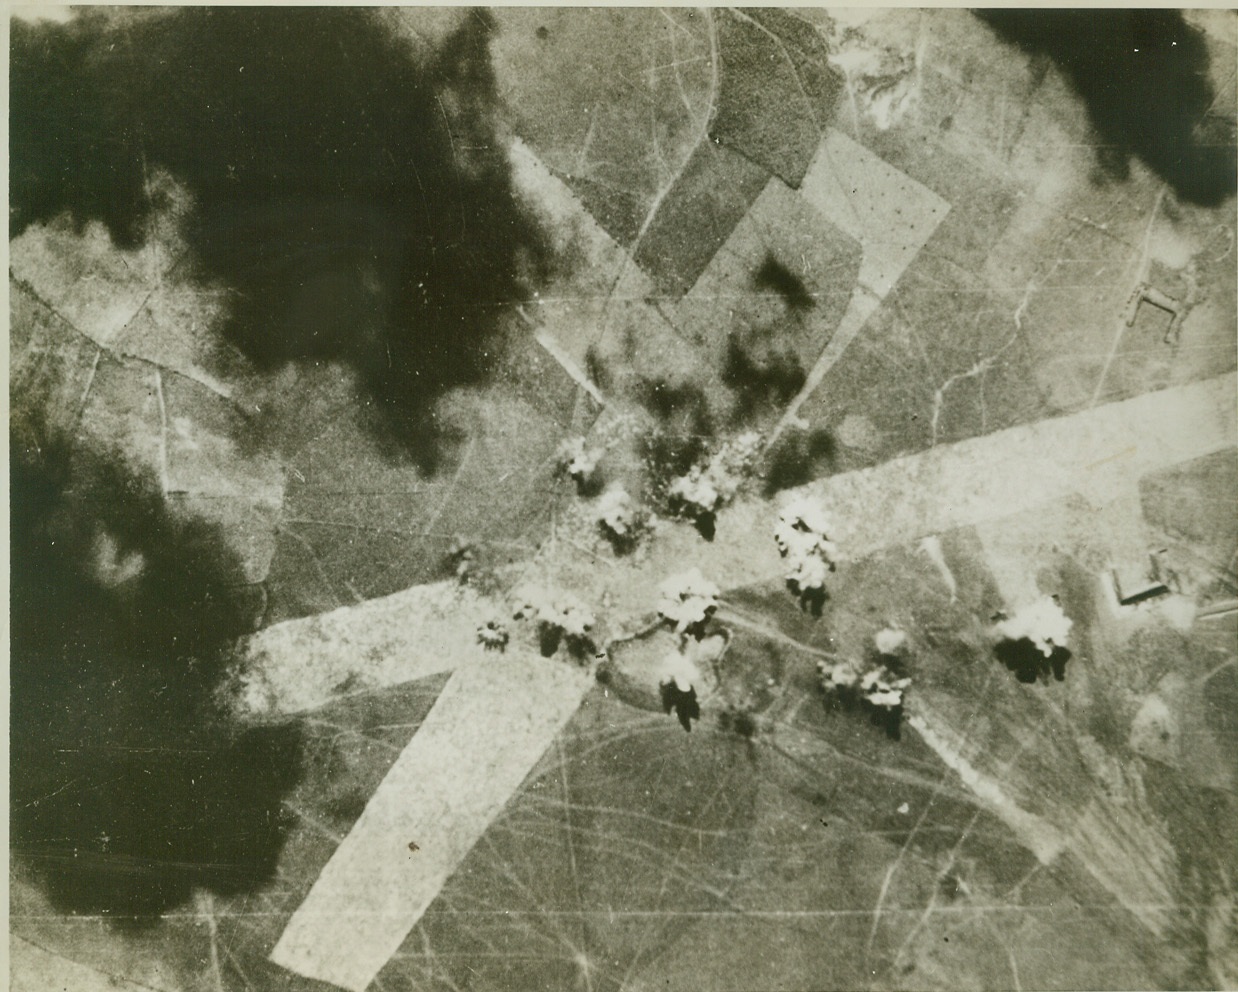 R.A.F. BLASTS JAP LANDING FIELD, 2/19/1943. BURMA- Eighteen R.A.F. bombs burst across runways on a Jap occupied airfield at Pokokku, Burma. The British bombers are hammering the Nipponese and their military installations regularly in this battle area. Most of the bursts are on runway intersections; two are on aircraft shelters. The black patches are cloud shadows. Credit: ACME;